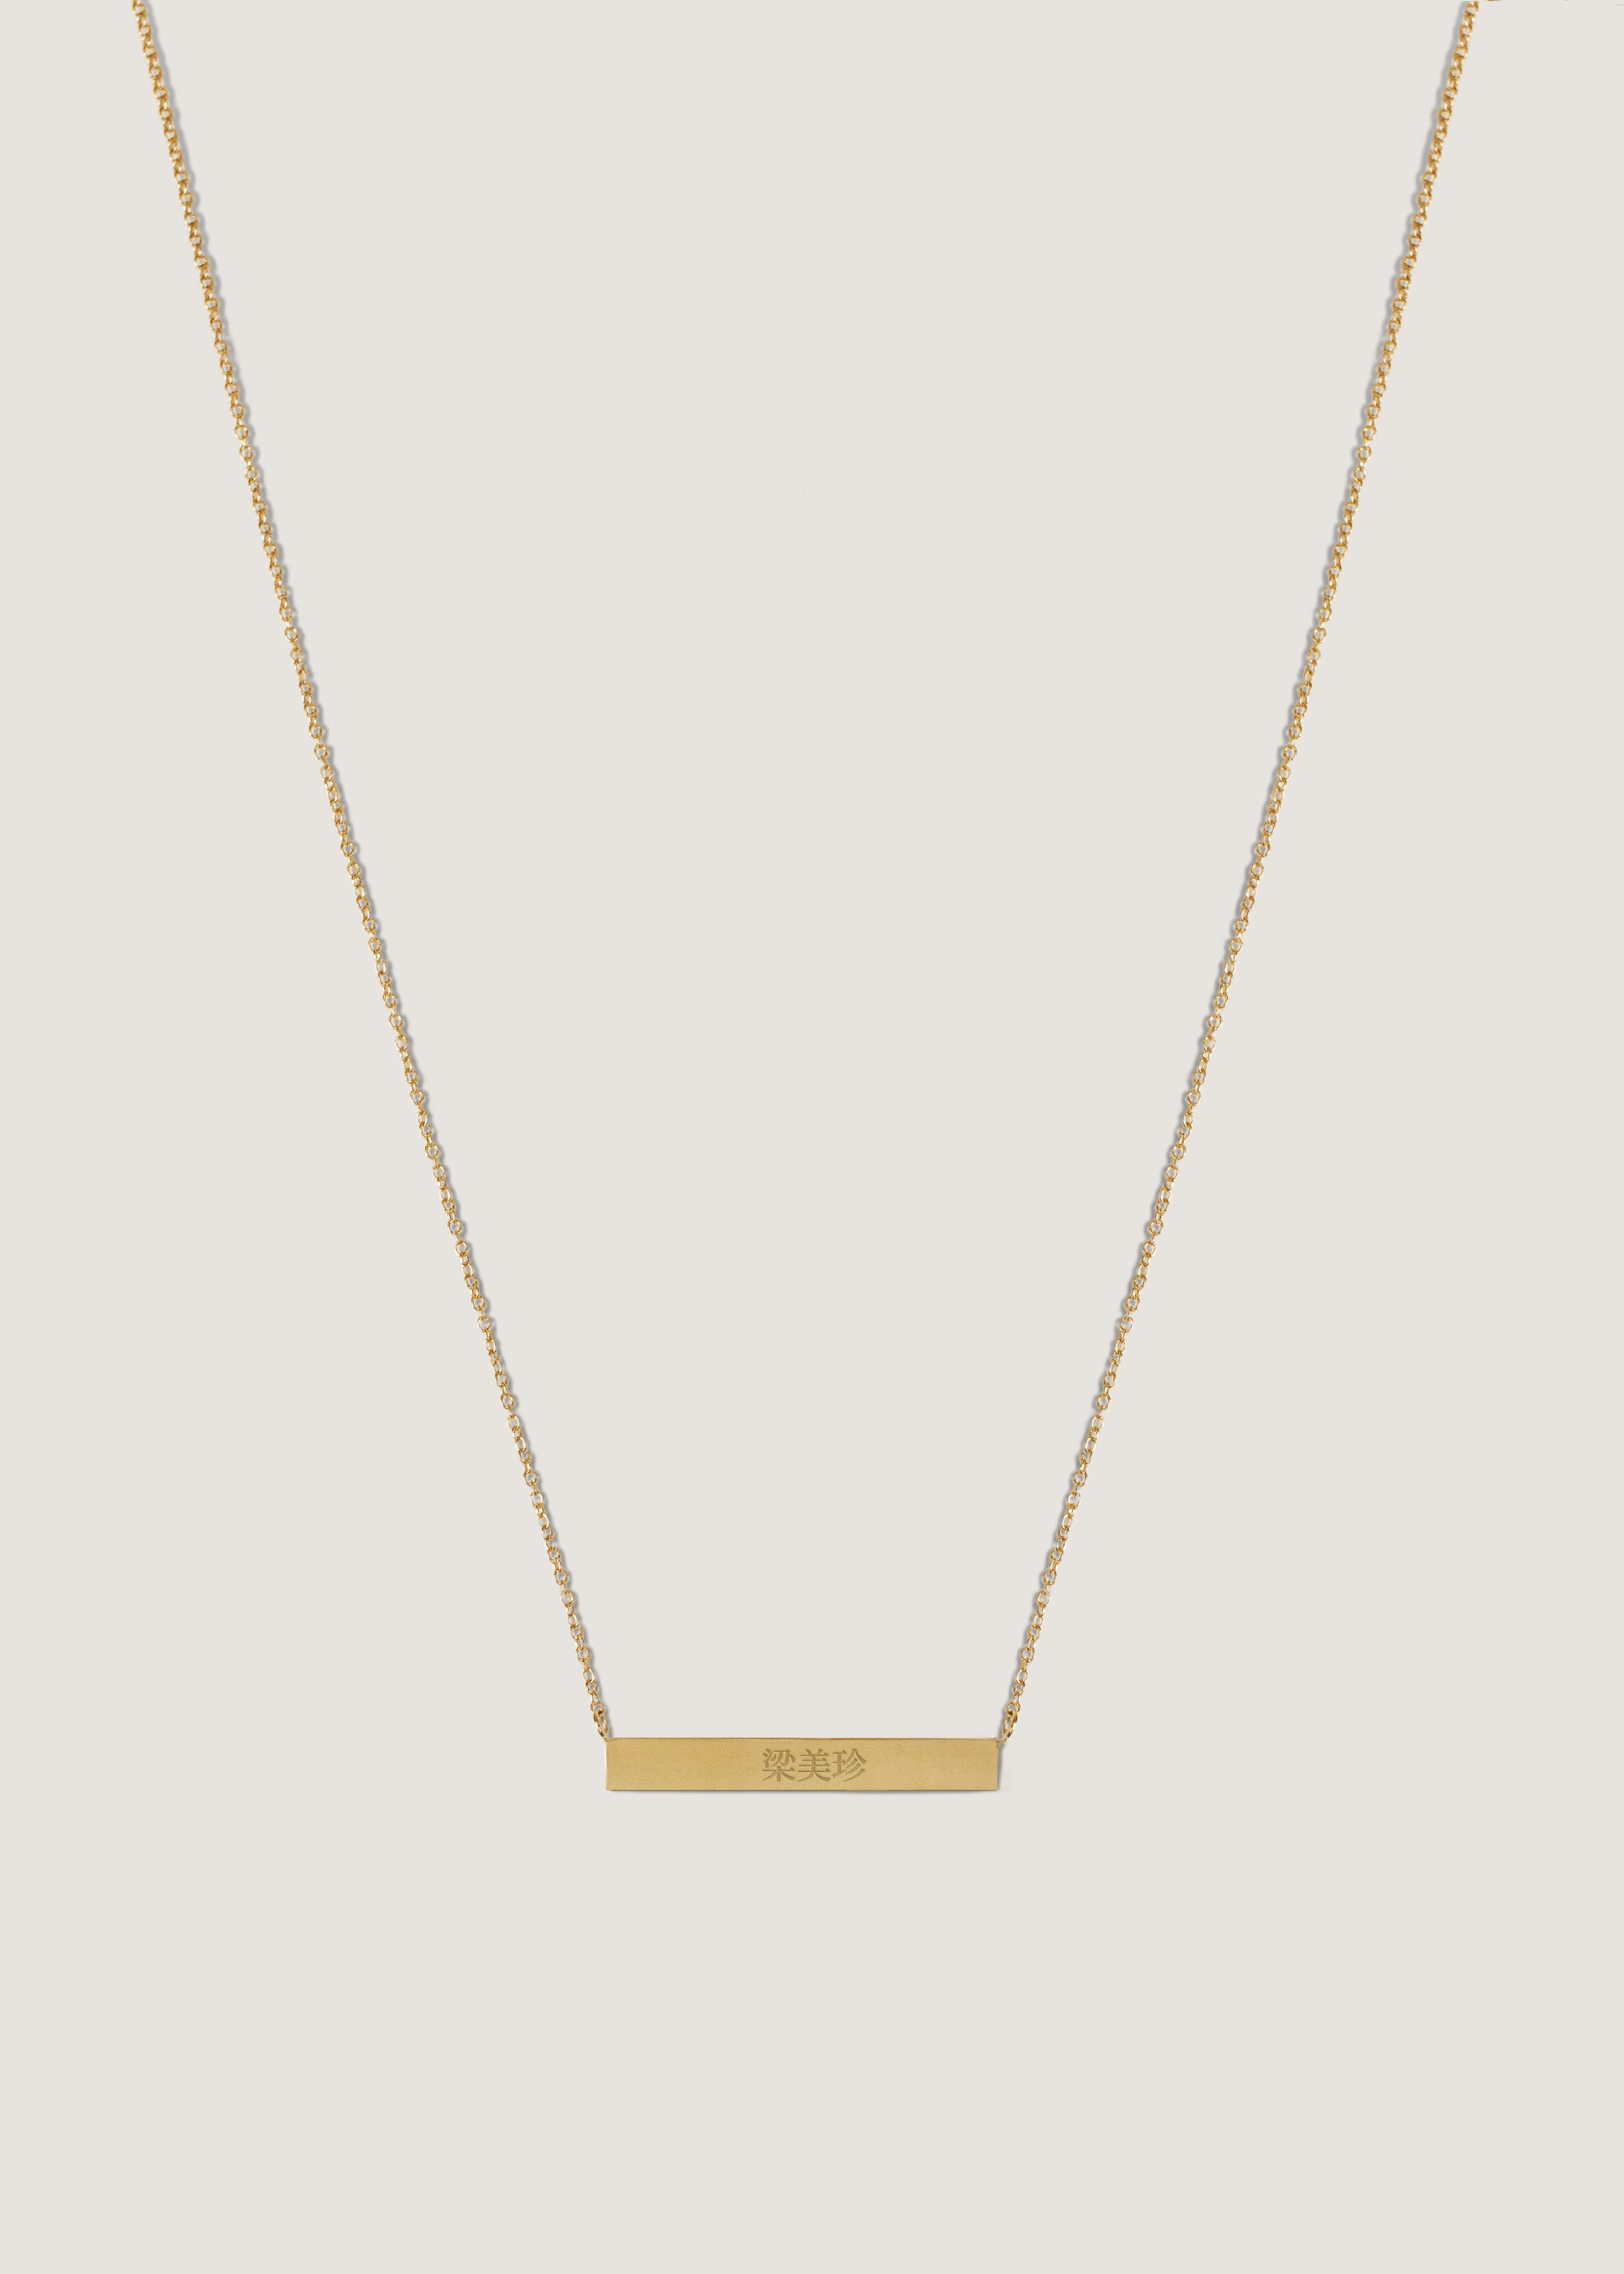 alt="Heritage Gold Bar Necklace - Chinese"